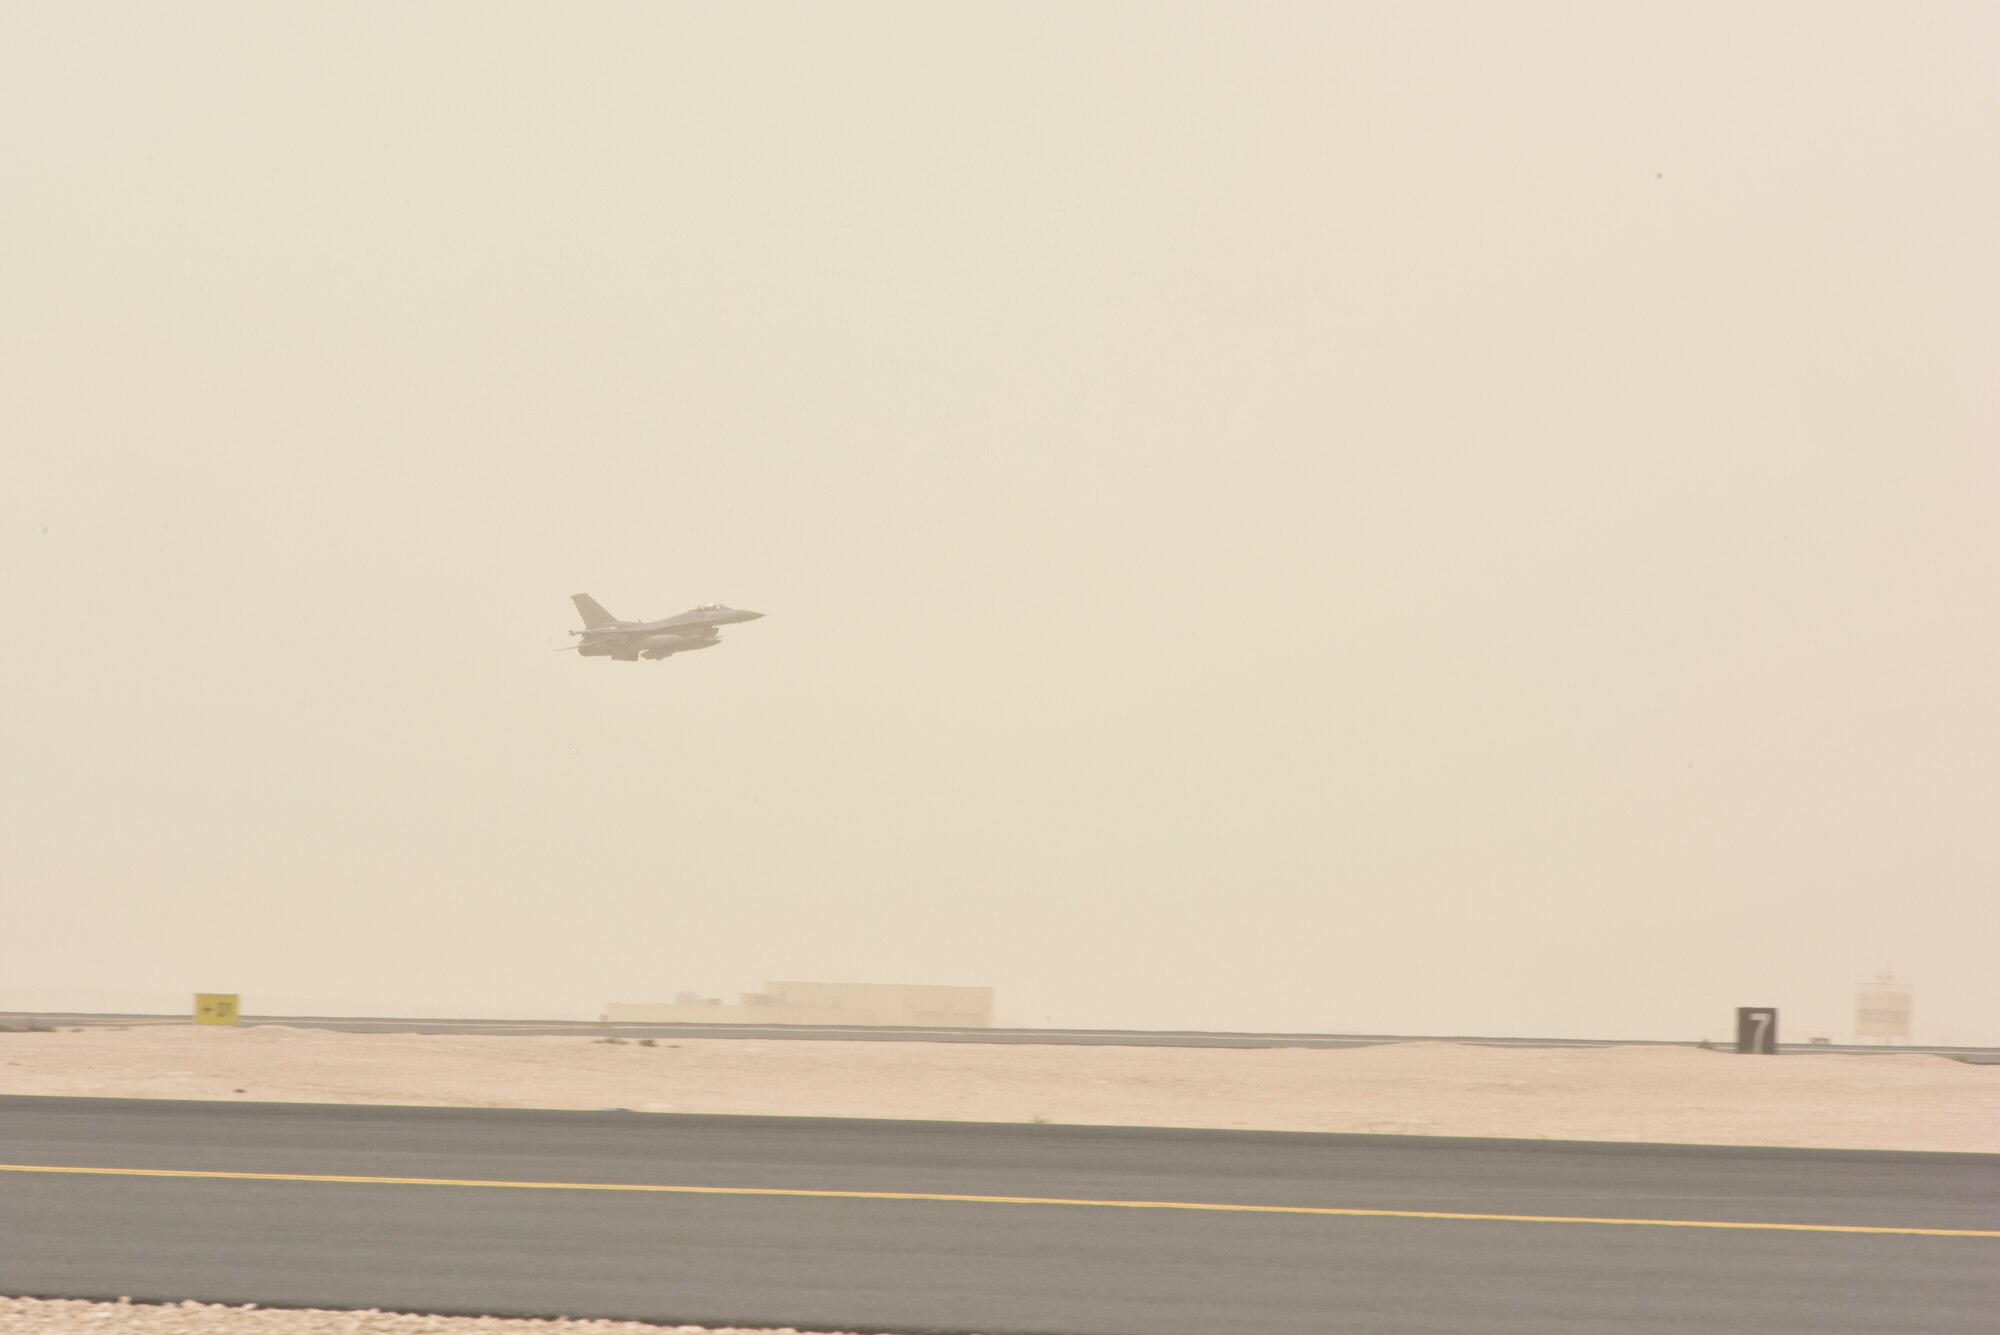 An F-16 Fighting Falcon with the 555th Fighter Squadron, also known as the “world famous, highly-respected” Triple Nickel, takes off at Al Udeid Air Base, Qatar on Feb. 26,  2020. While deployed to AUAB, the Triple Nickel flew more than 840 sorties and nearly 5,000 hours in less than 120 days, directly supporting combat operations in Operations Spartan Shield and Inherent Resolve. (U.S. Air Force photo by Tech. Sgt. John Wilkes)